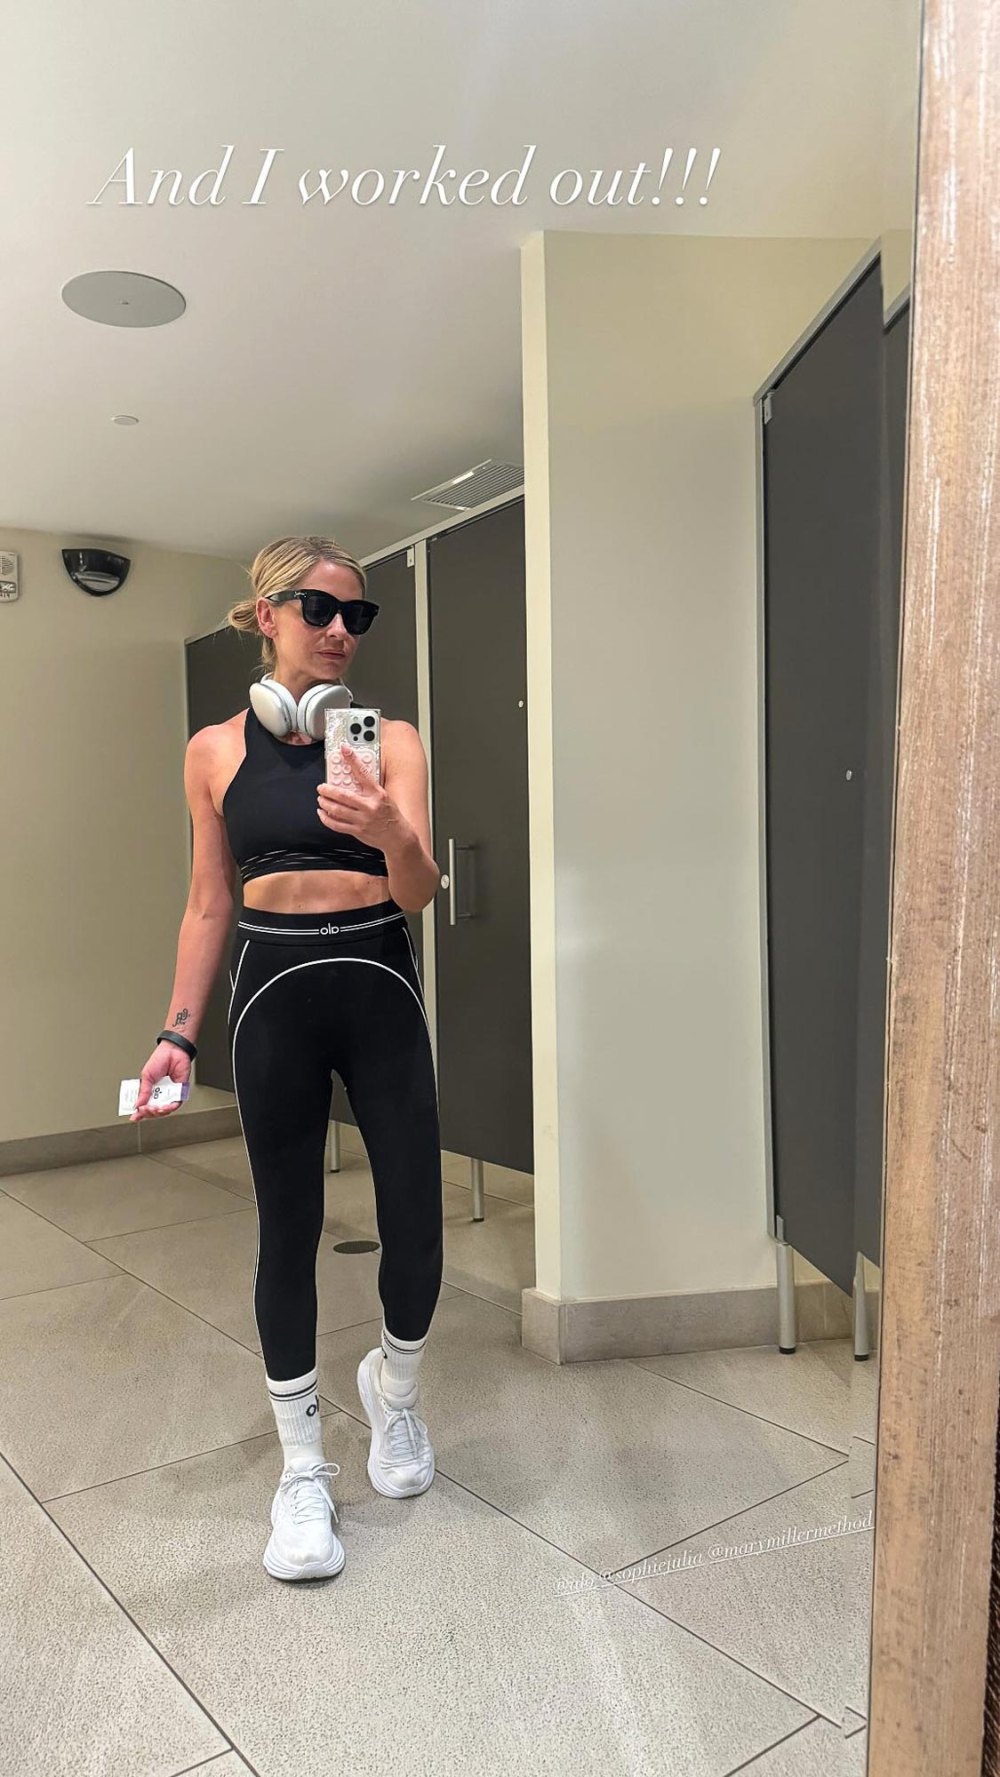 Sarah Michelle Gellar Shows Off Her Tanned and Toned Fitness Bod While on Vacation With Her Family 208 223